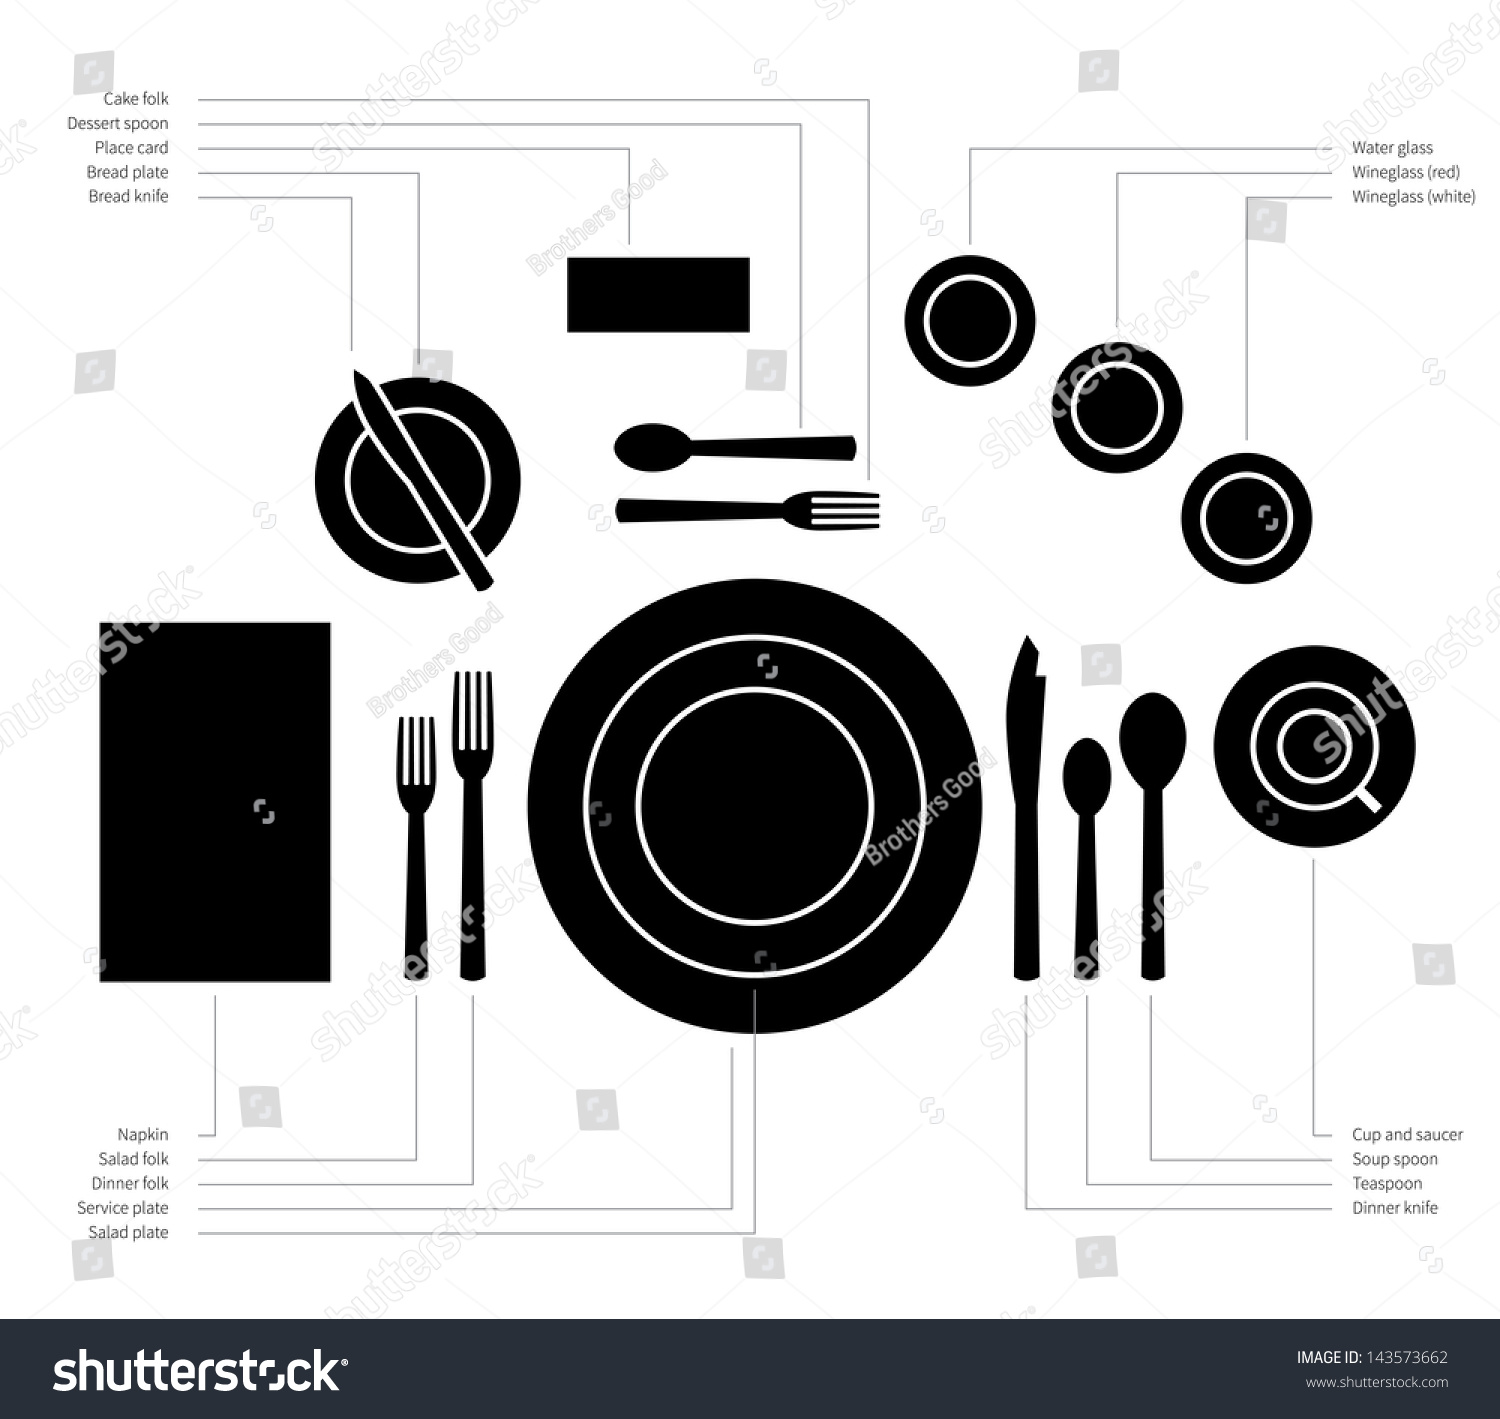 Place Setting Diagram For A Formal Dinner With Soup And Salad Courses ...